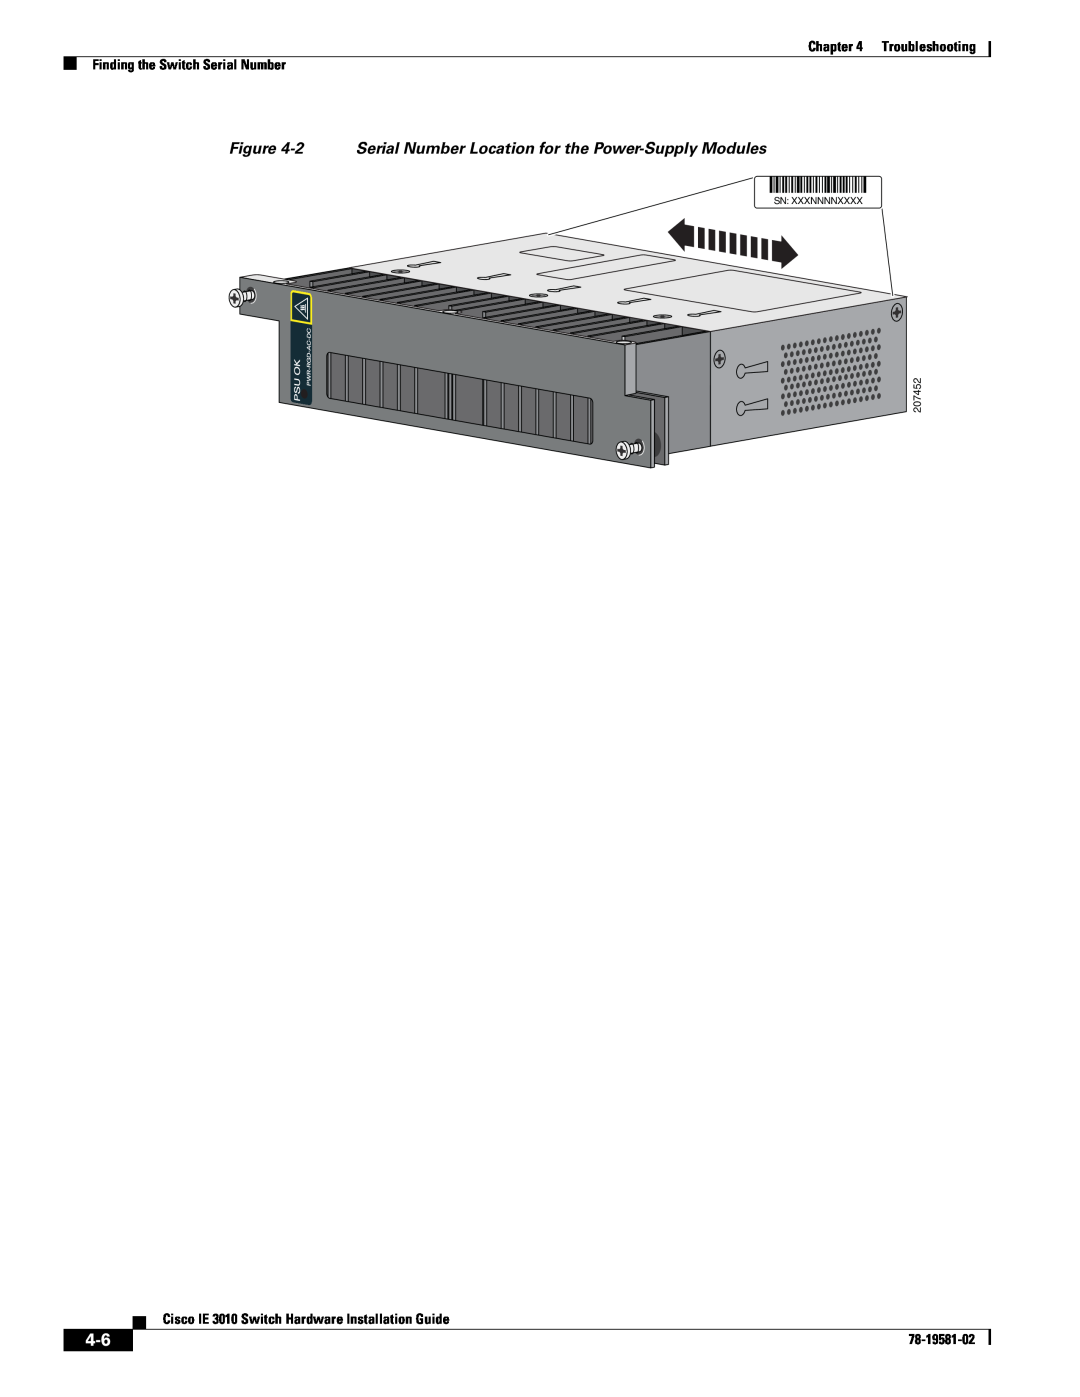 Cisco Systems IE3010 manual 2 Serial Number Location for the Power-Supply Modules, 78-19581-02, 207452, Sn Xxxnnnnxxxx 